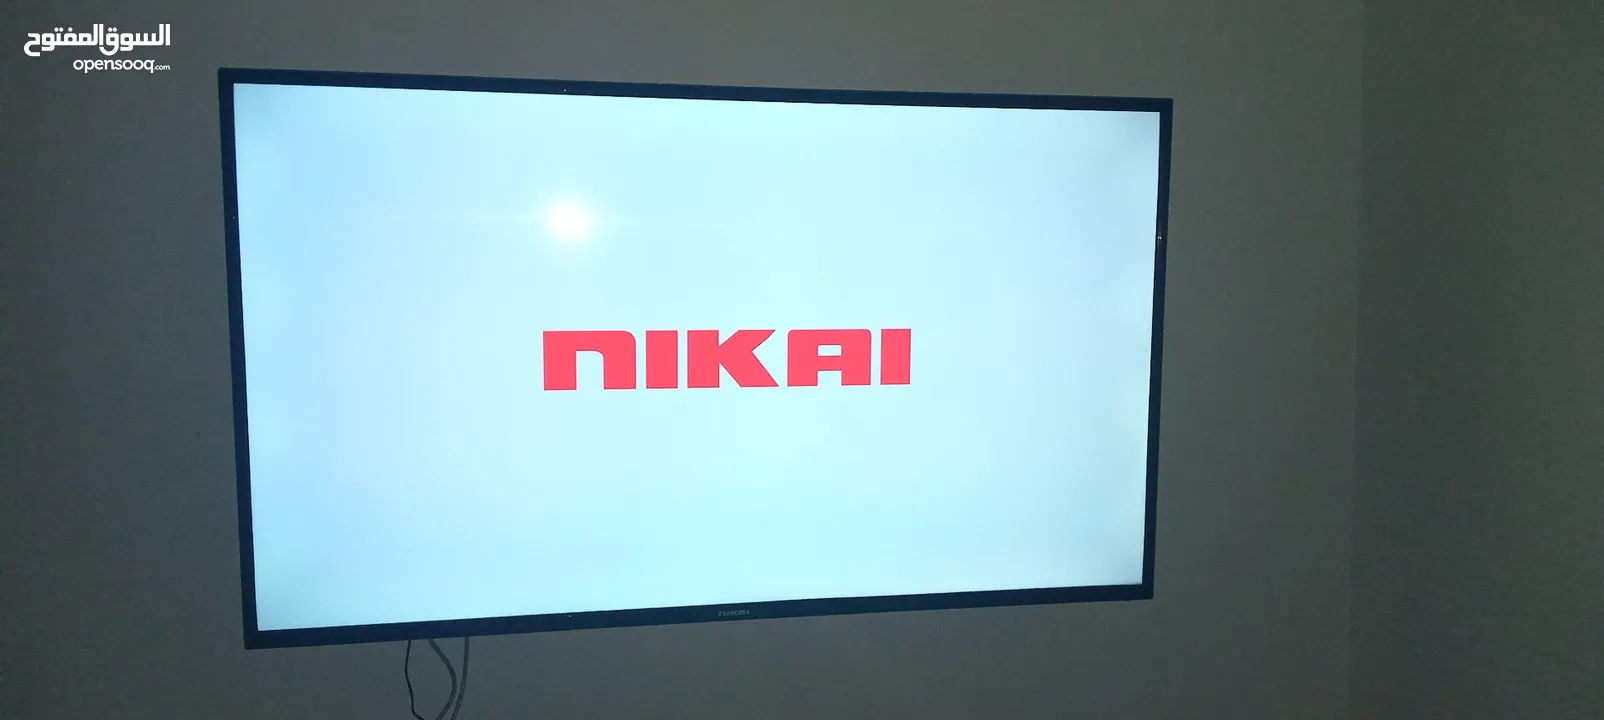 nikai android smart tv 55 Inc for sale